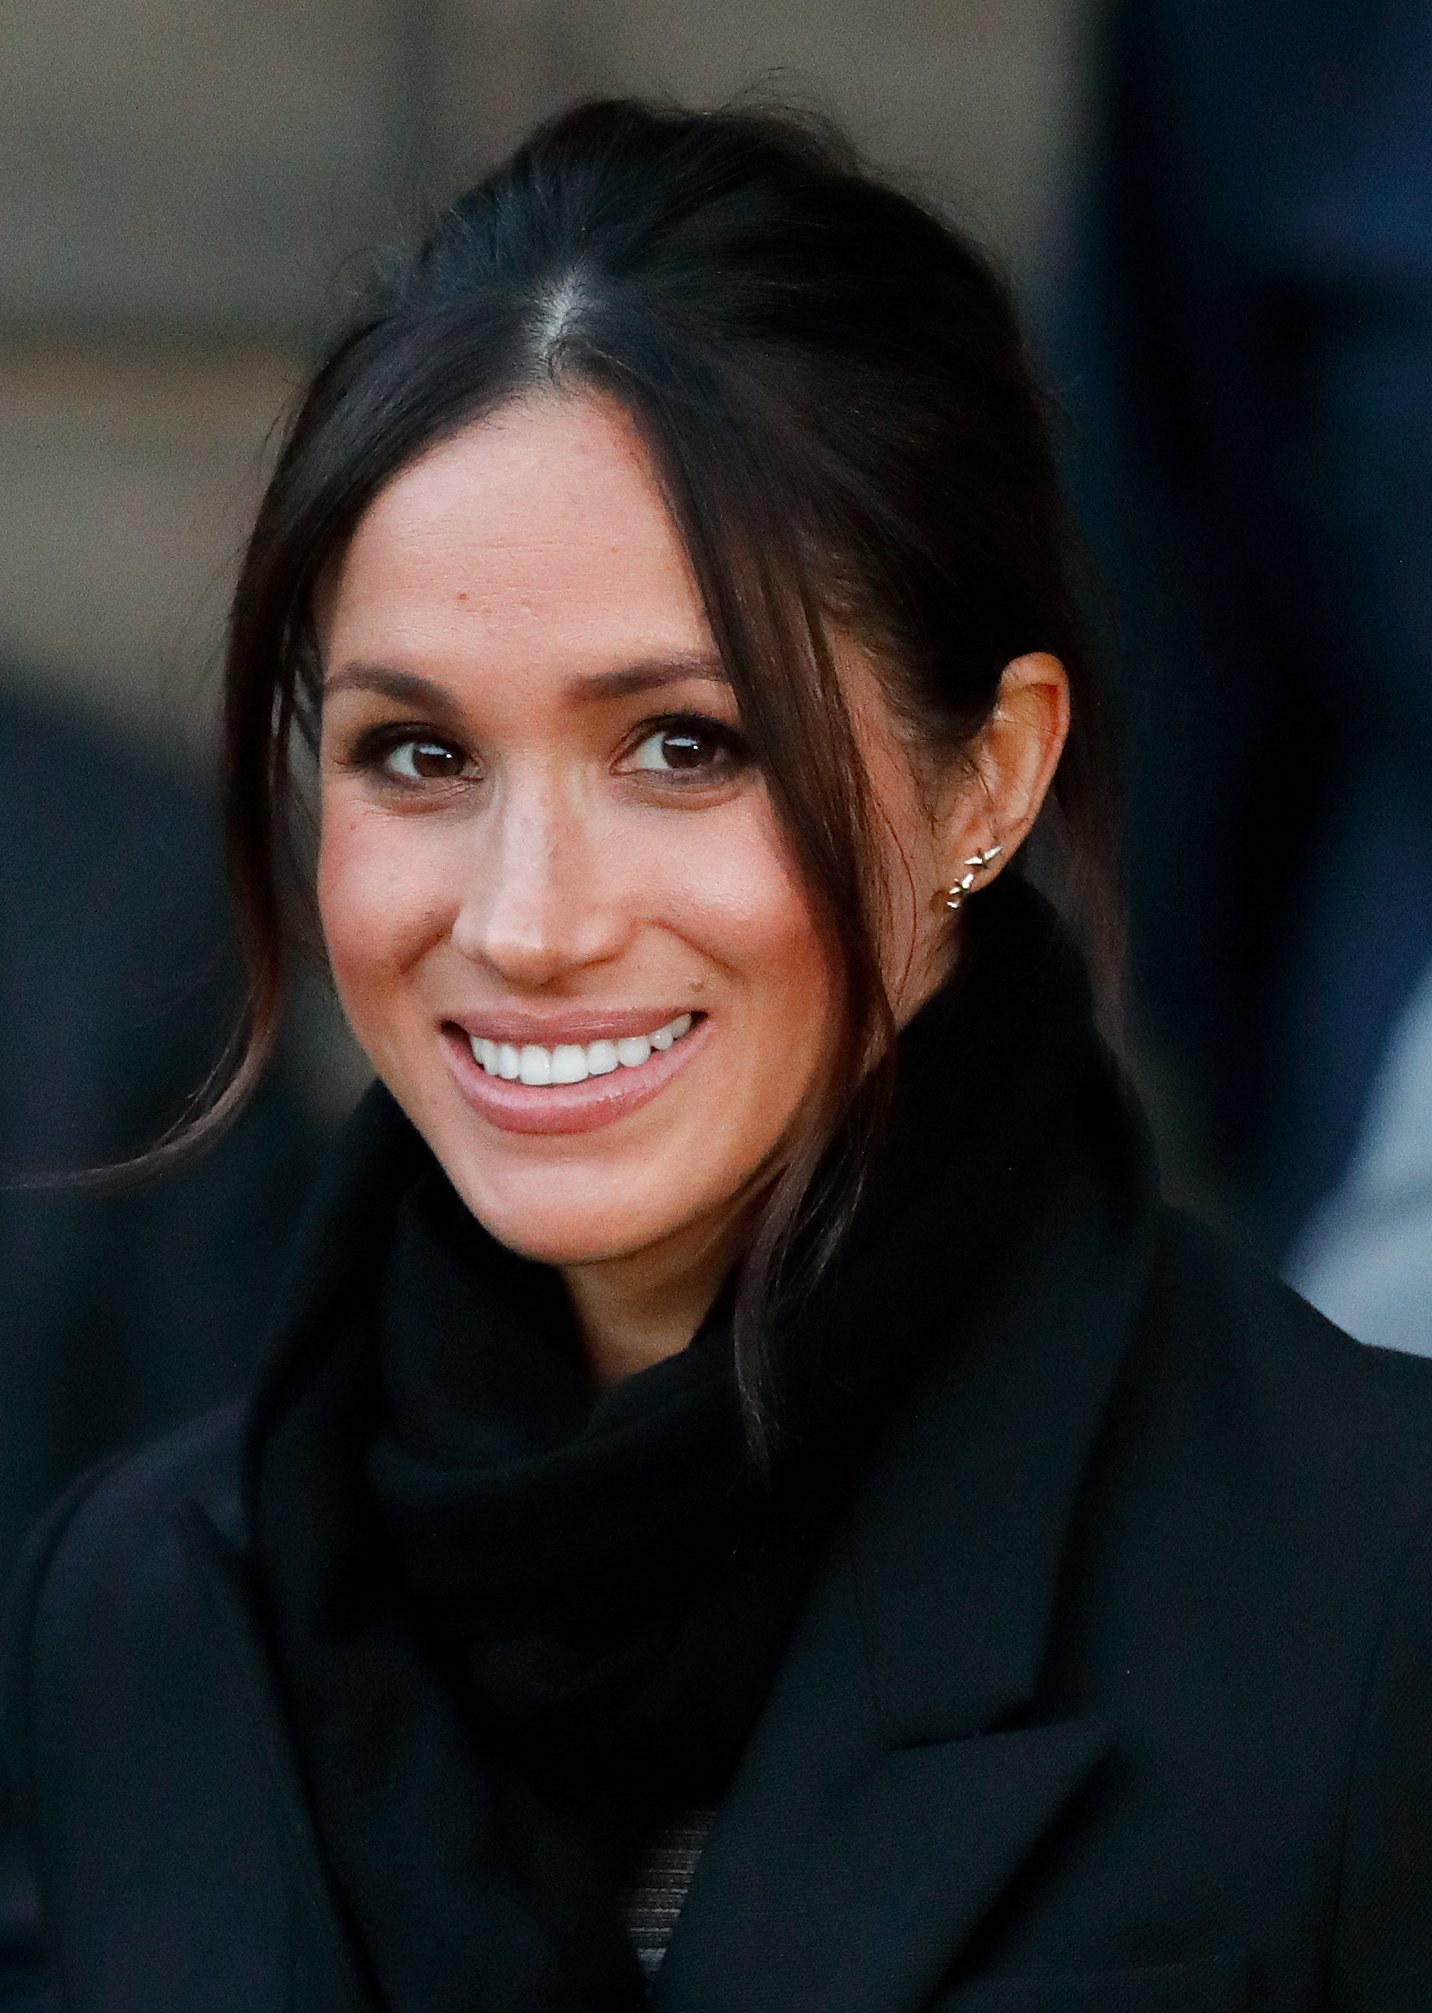 Meghan Markle visiting Cardiff Castle in January 2018. | Photo: Getty Images